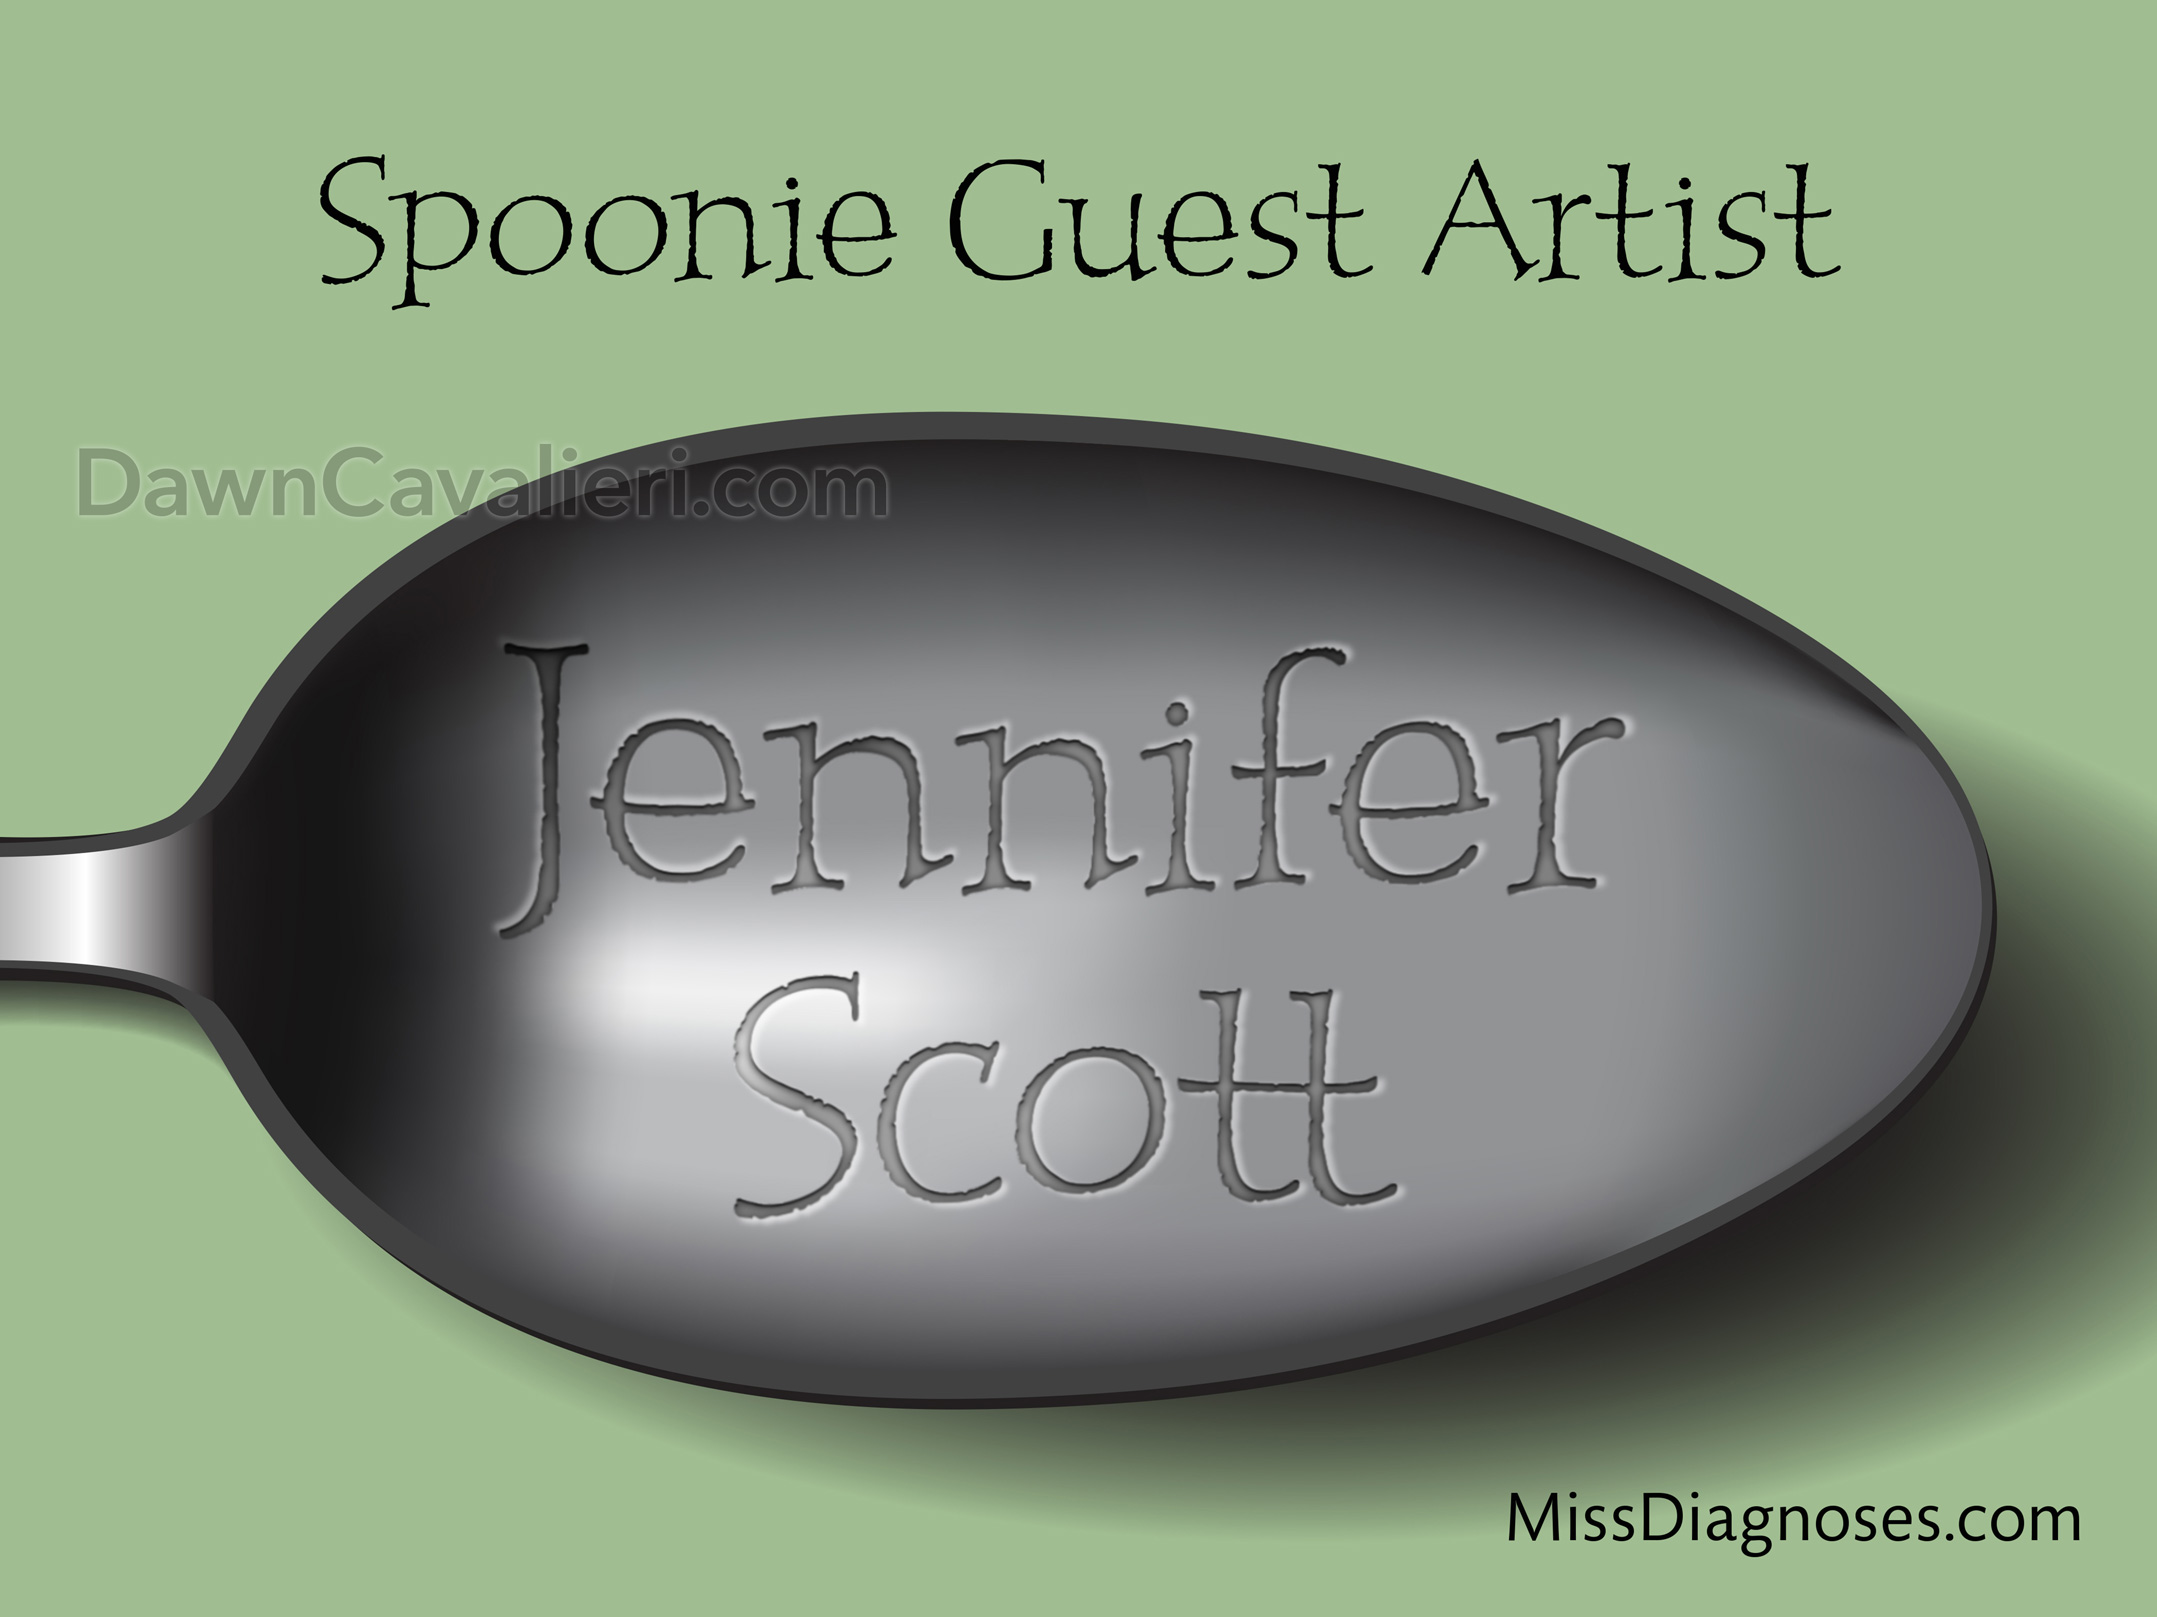 Header image for blog post. The top reads 'Spoonie Guest Artist.' The illustration is of the bowl part of a spoon in silver tones. Running across the bowl, styled to look like engraved type, is the name Jennifer Scott. In the lower right corner of the image is the name of the blog: Miss Diagnoses dot com. The background is light green. The ratio of the image is roughly 1.3 to 1.